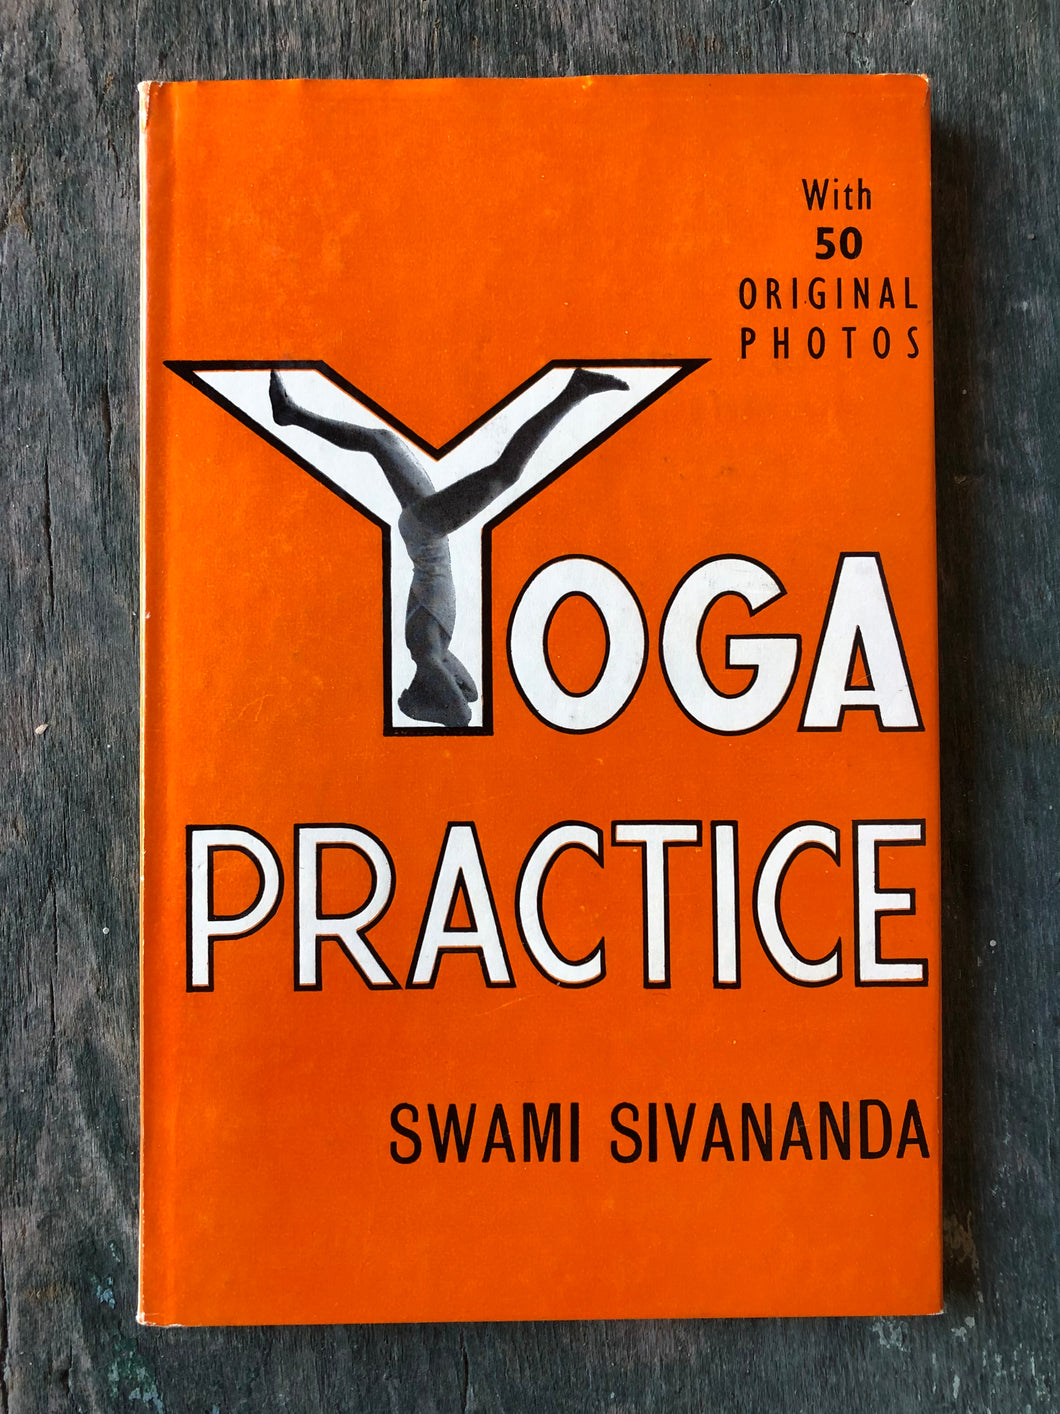 Yoga Practice: For Developing and Increasing Physical, Mental and Spiritual Powers by Swami Sivananda in collaboration with O. Nussbaumer and M. Muller-Nafzger